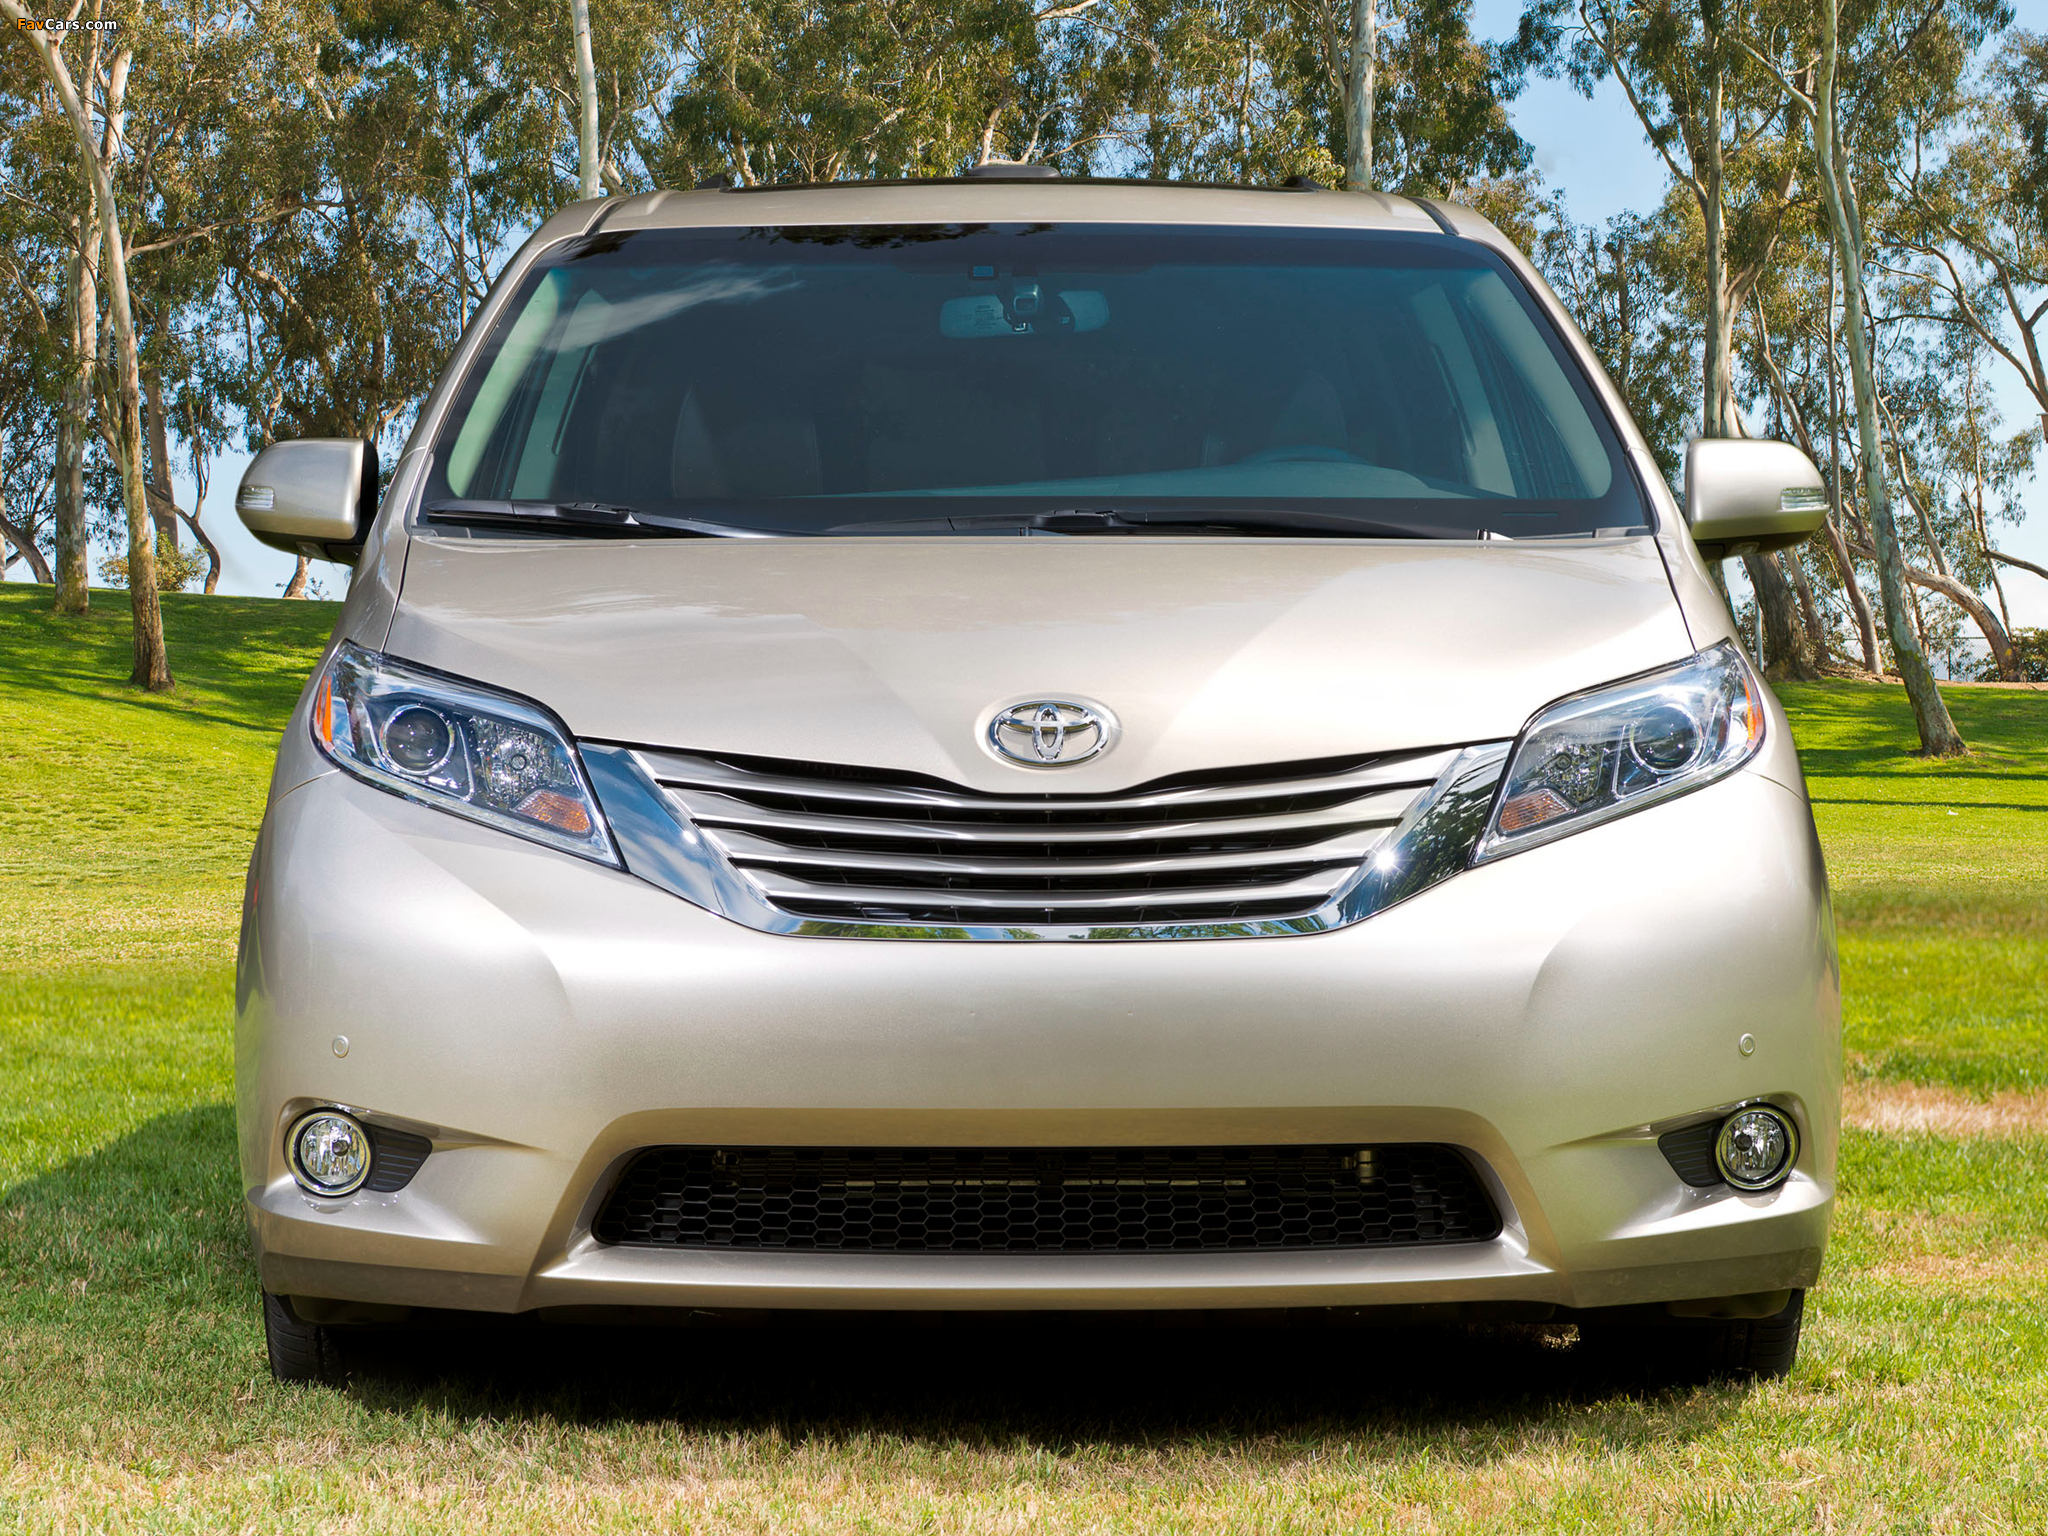 Images of 2015 Toyota Sienna 2014 (2048 x 1536)